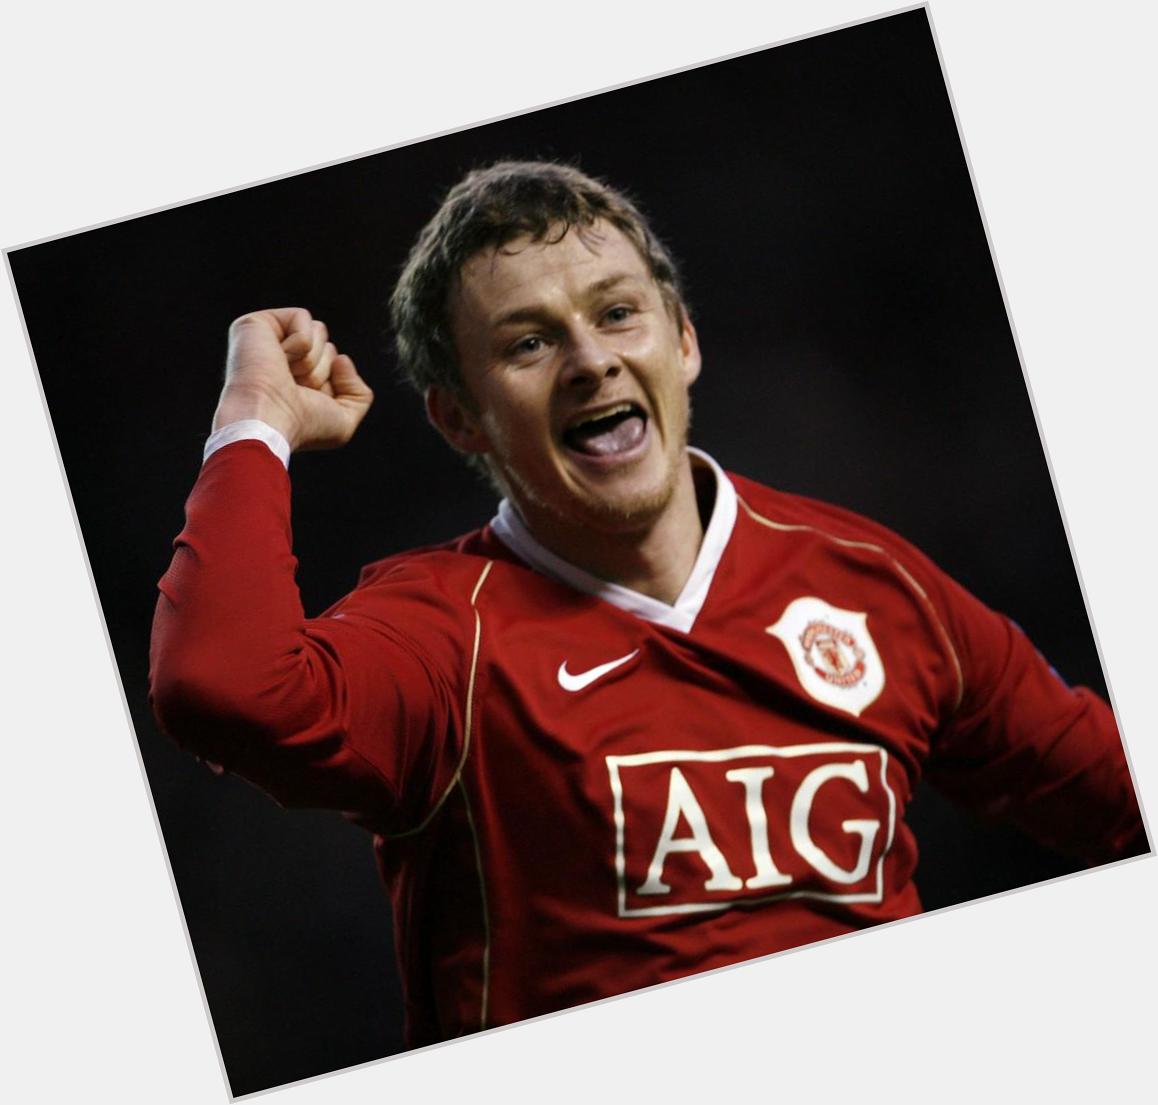 Happy 42nd birthday to Ole Gunnar Solskjær. The striker scored 91 Premier League goals in his time at Man United. 